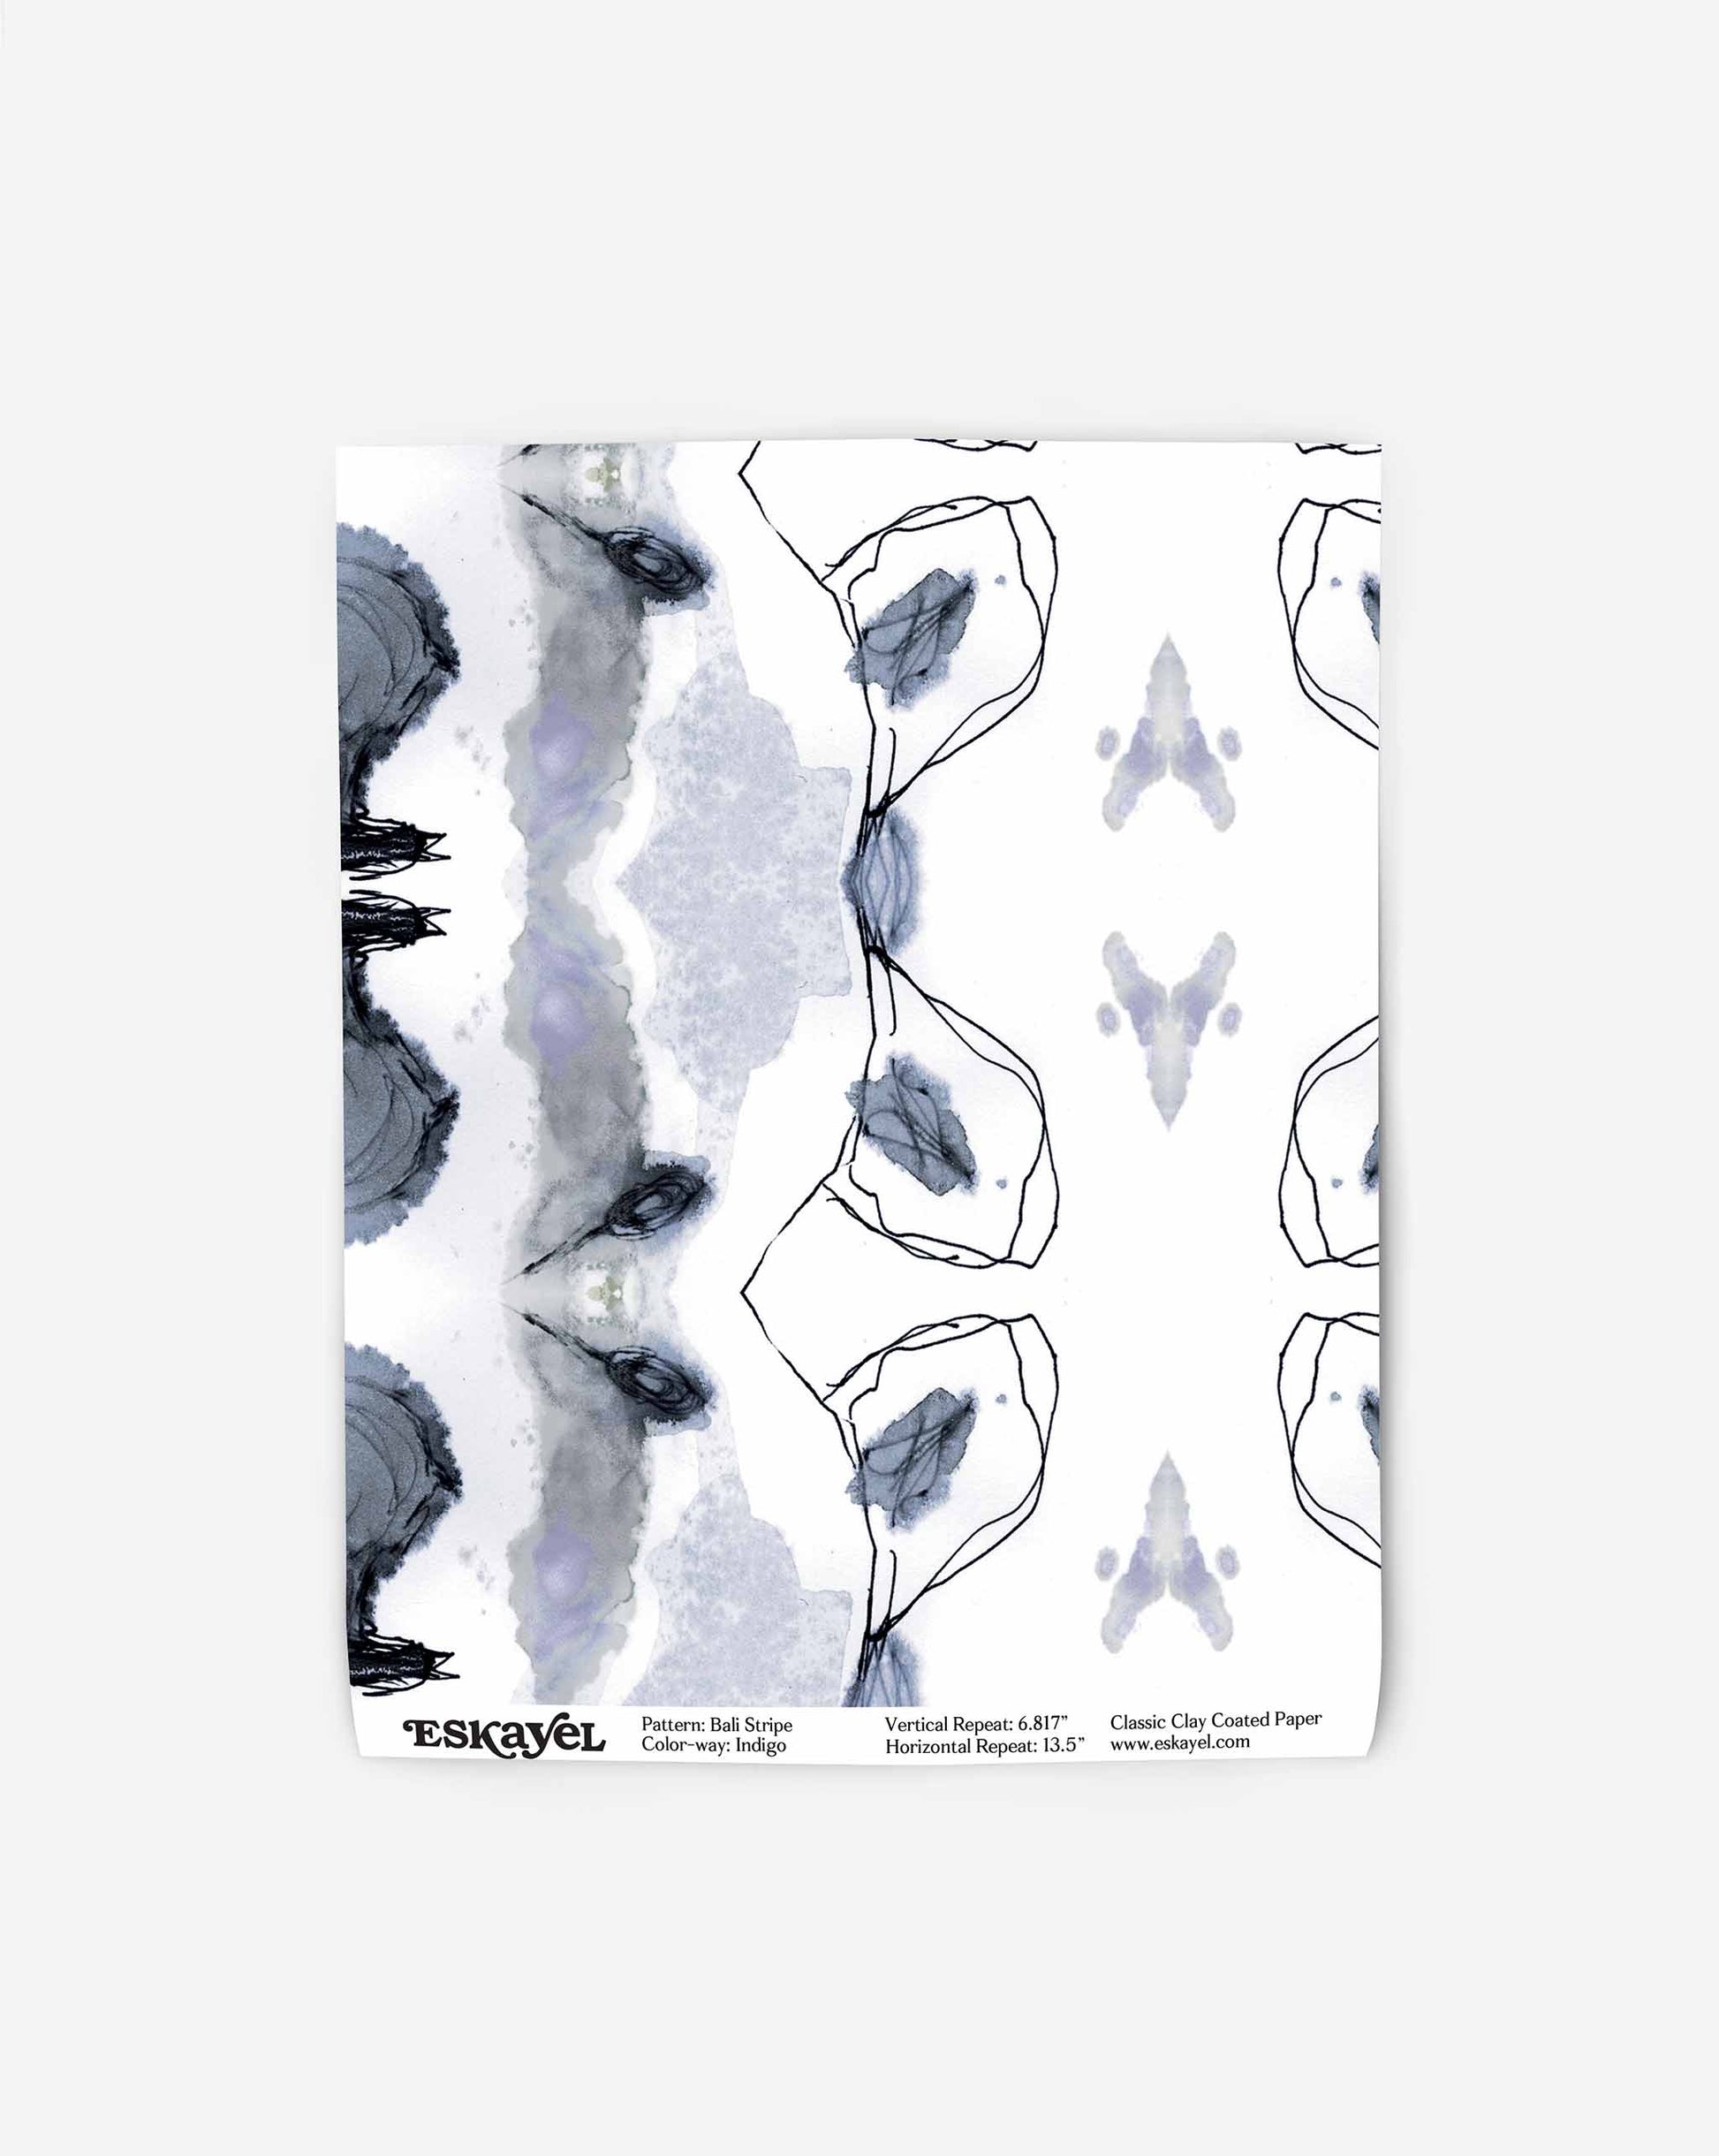 Abstract art print with a symmetrical pattern featuring black outlines and soft purple, gray, and blue watercolor splotches. The design evokes the elegance of high-end wallpaper. Text at the bottom reads: "Pattern: Bali Stripe Wallpaper||Indigo.